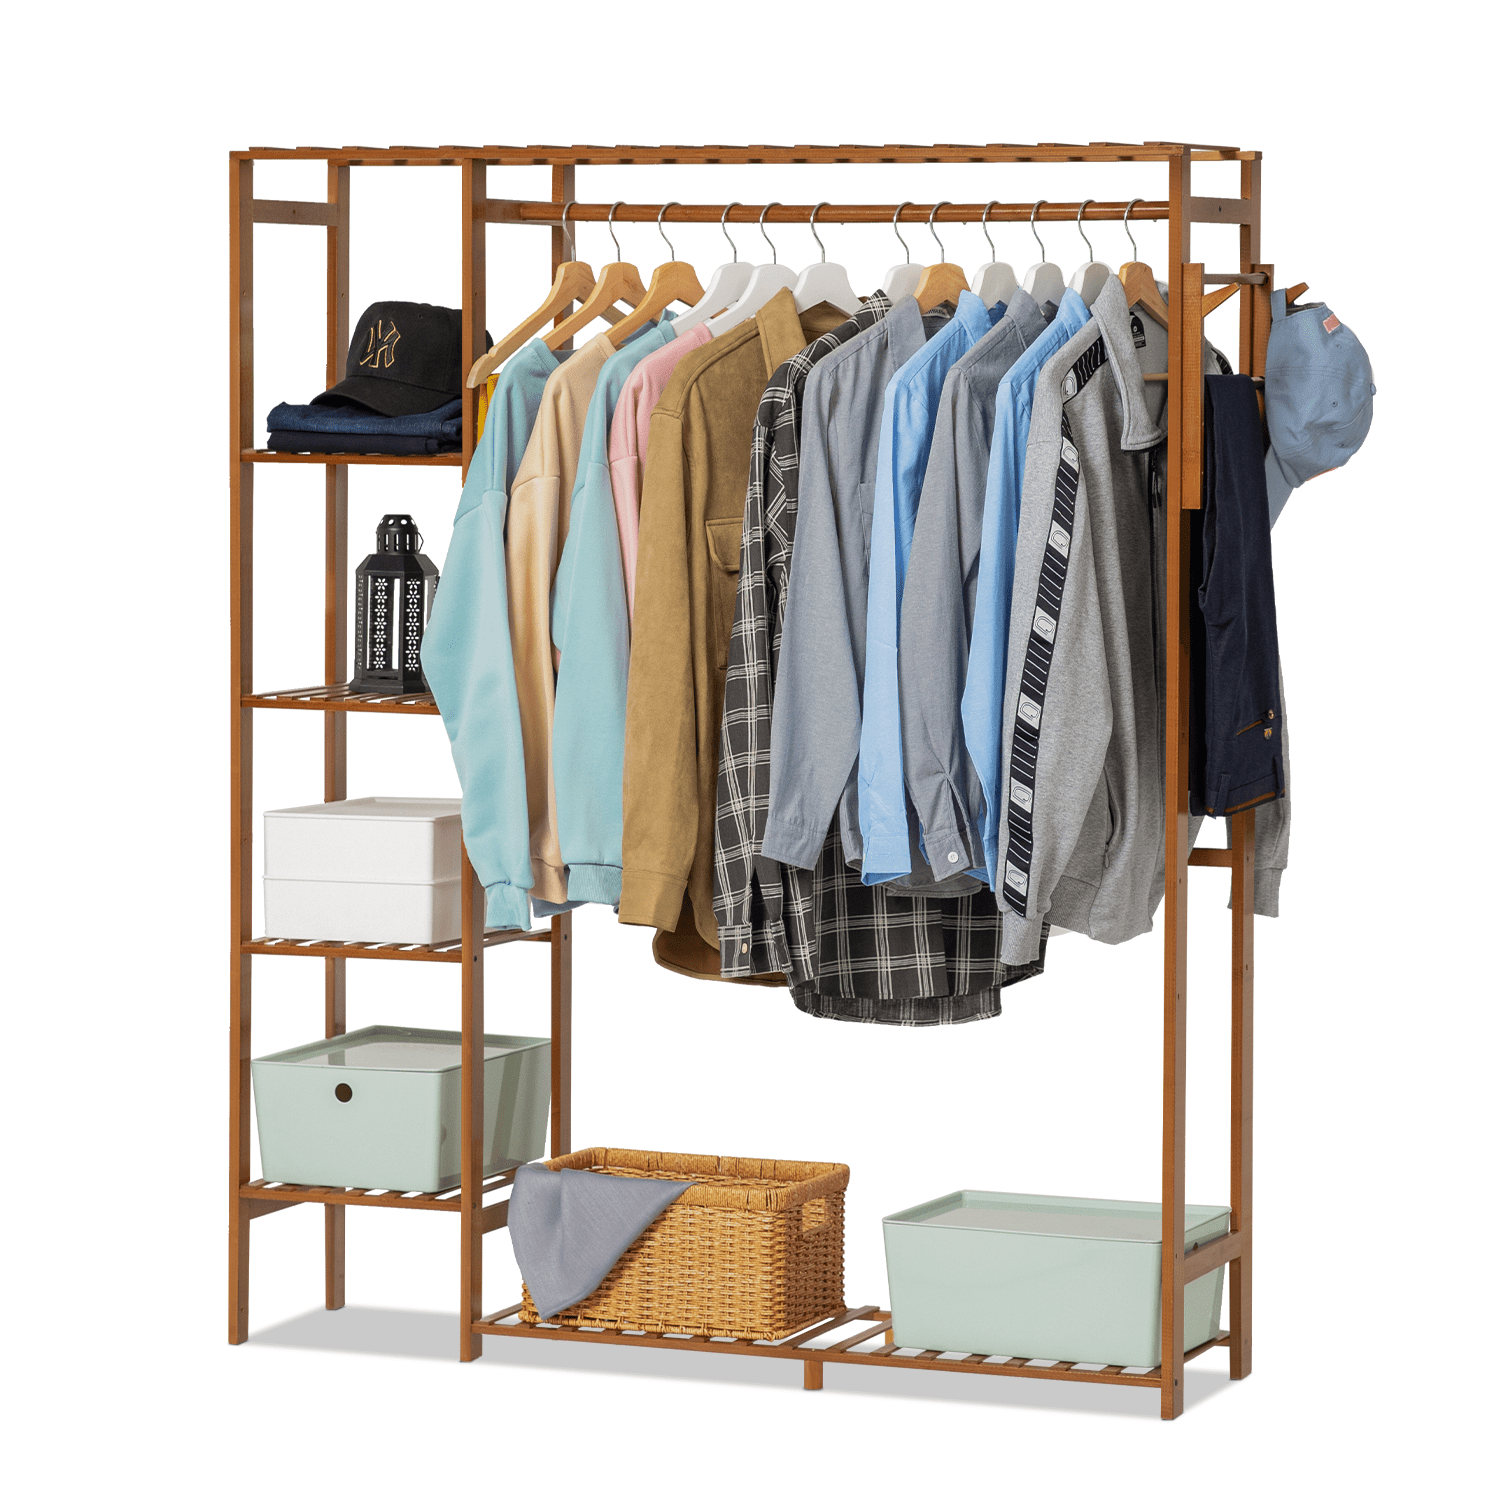 6 Tier Ladder Strong Wooden Clothes Rail Garment Rack with Top Rod Hanging  Shelf